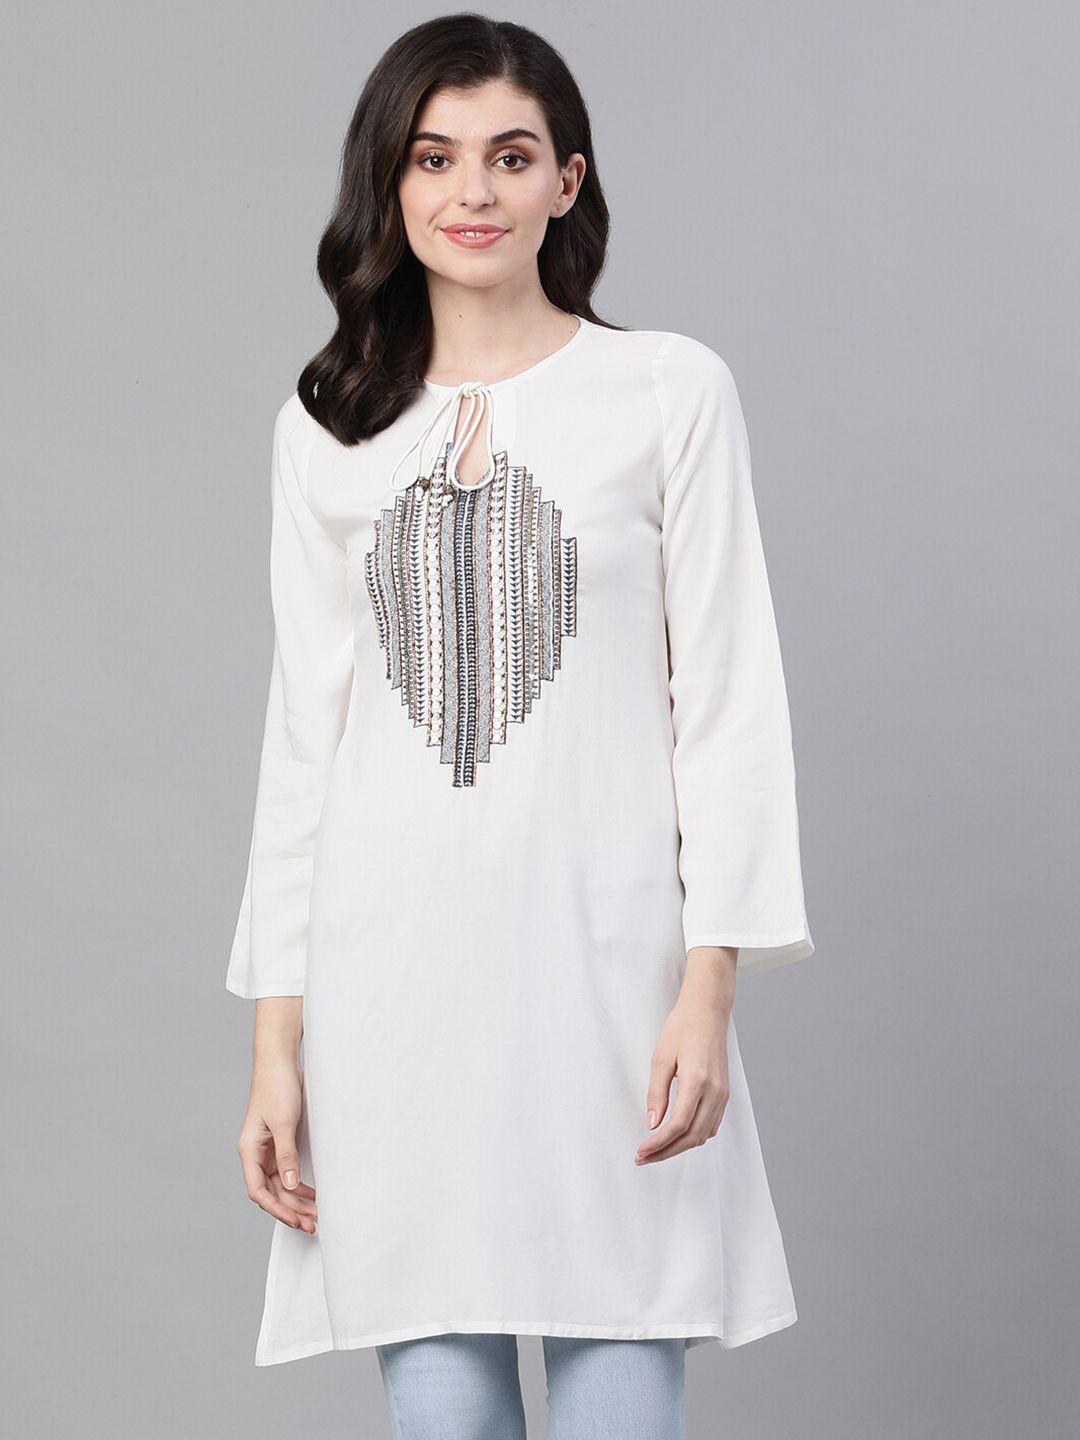 ishin off embroidered beads and stones tie-up neck kurti